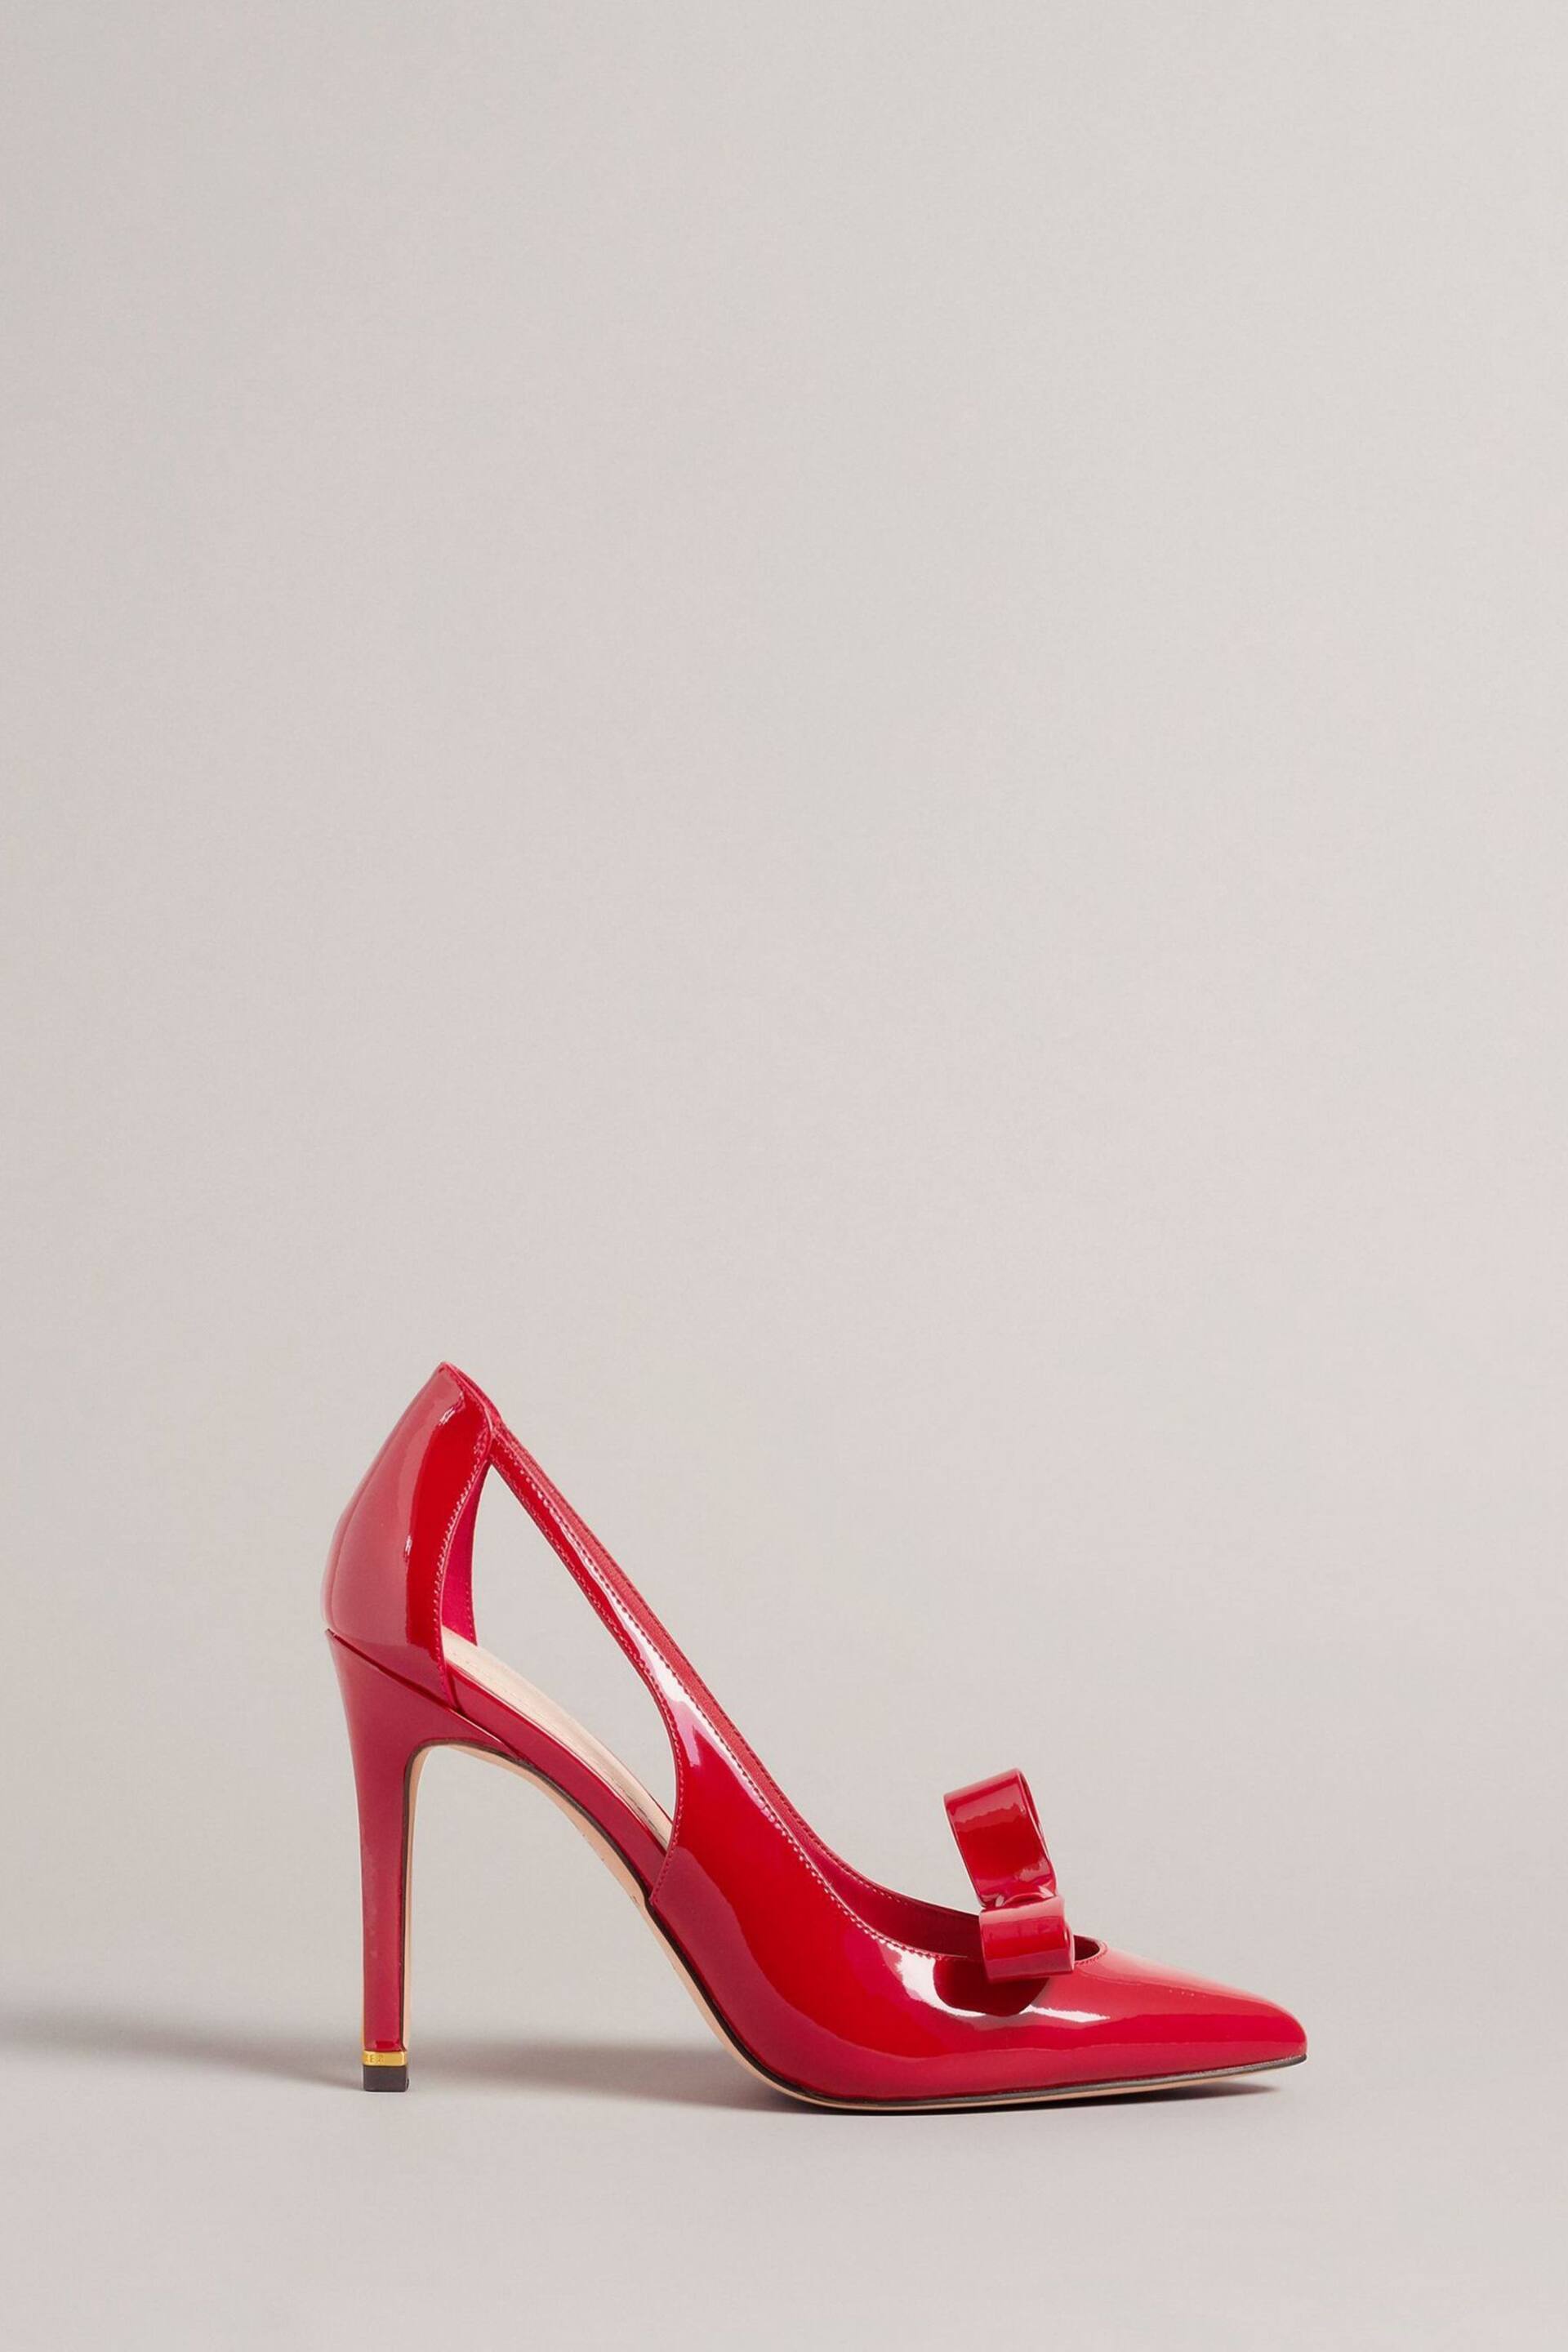 Ted Baker Red Orliney Patent Bow 100mm Cut-Out Detail Courts - Image 1 of 5